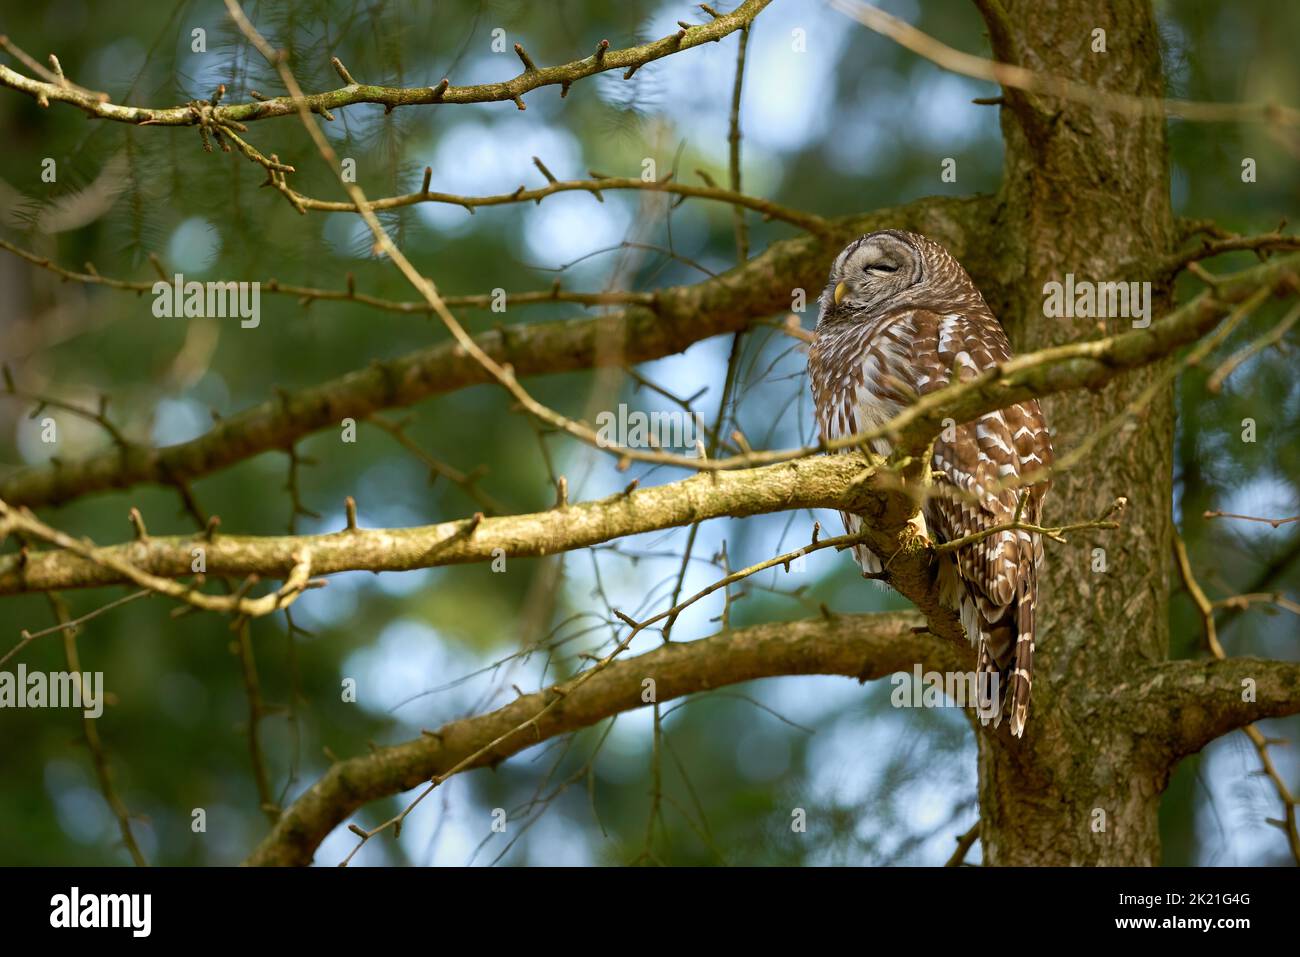 Barred Owl Pacific Northwest Forest. A Barred Owl looking down from a branch in the middle of a forest. Stock Photo